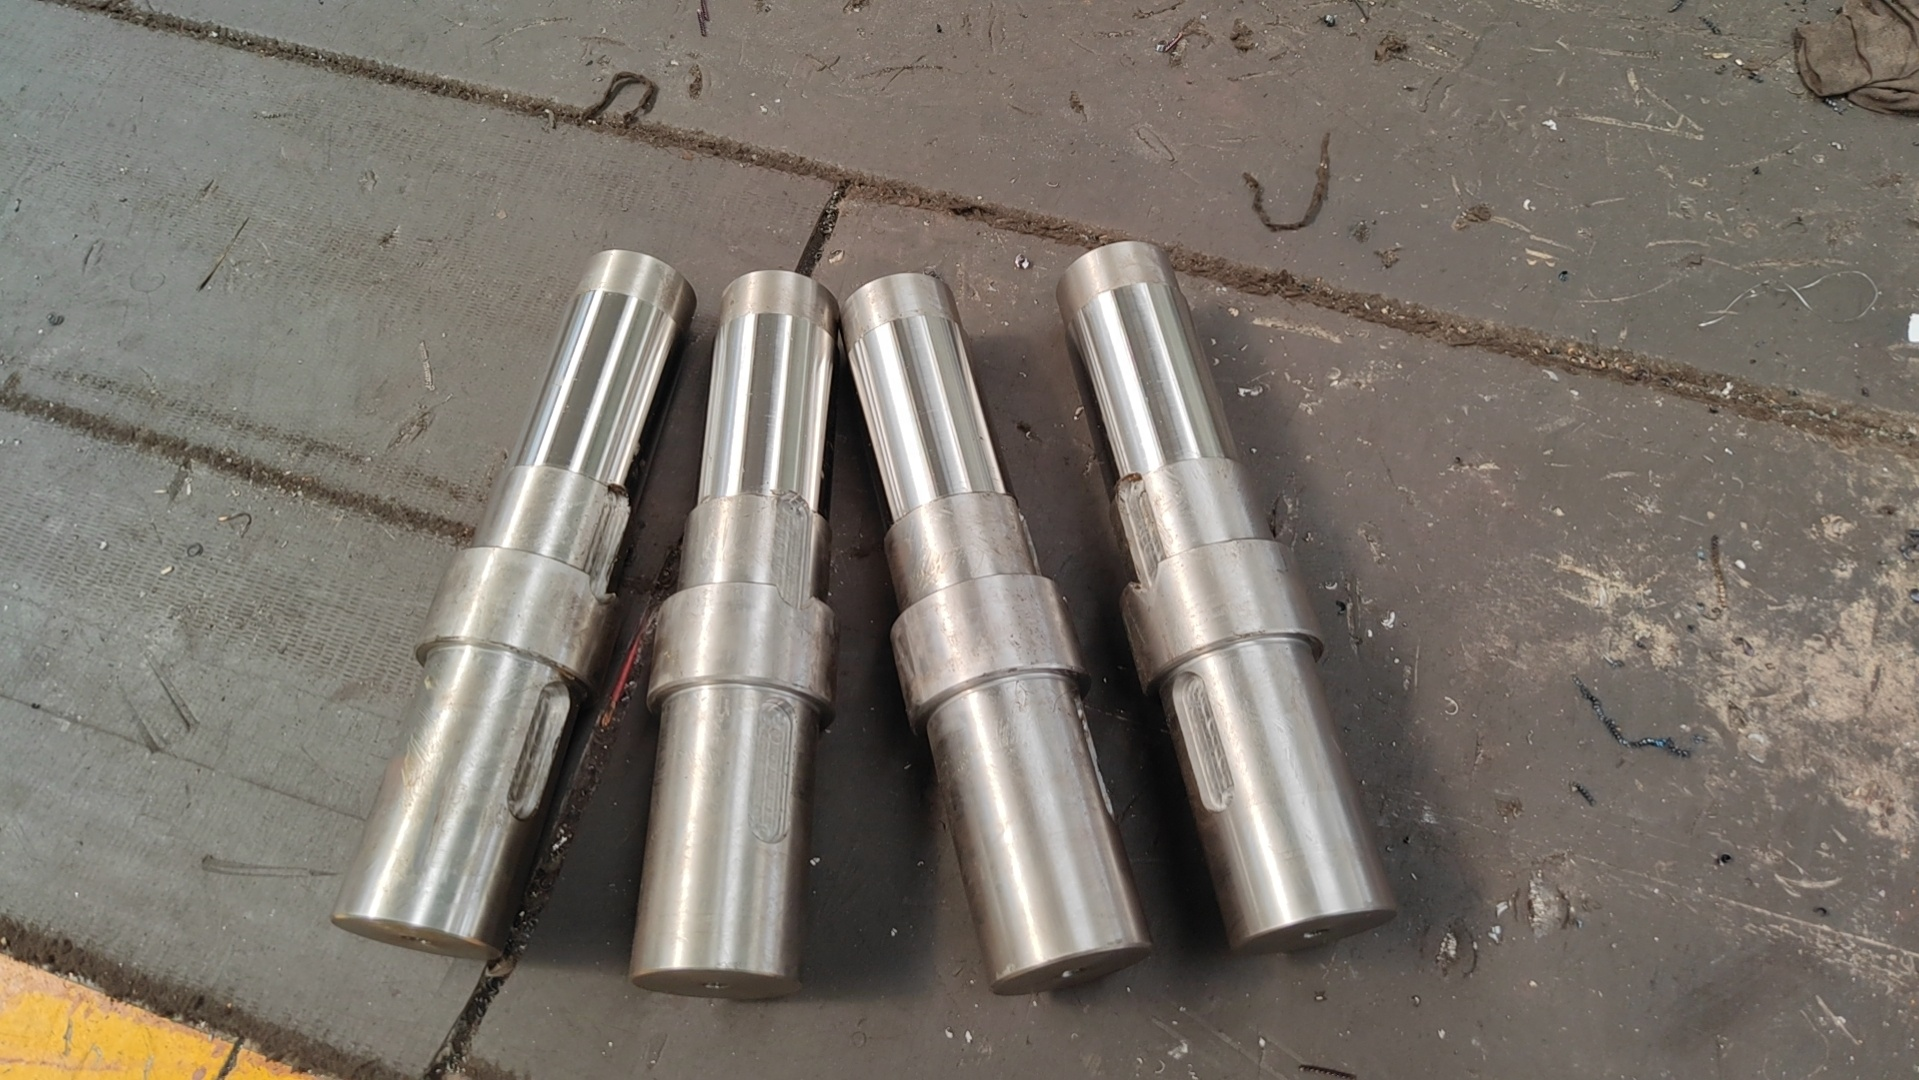 Machining Forged Large Pinion Shaft High Quality Alloy Steel Large Module Gear Shaft